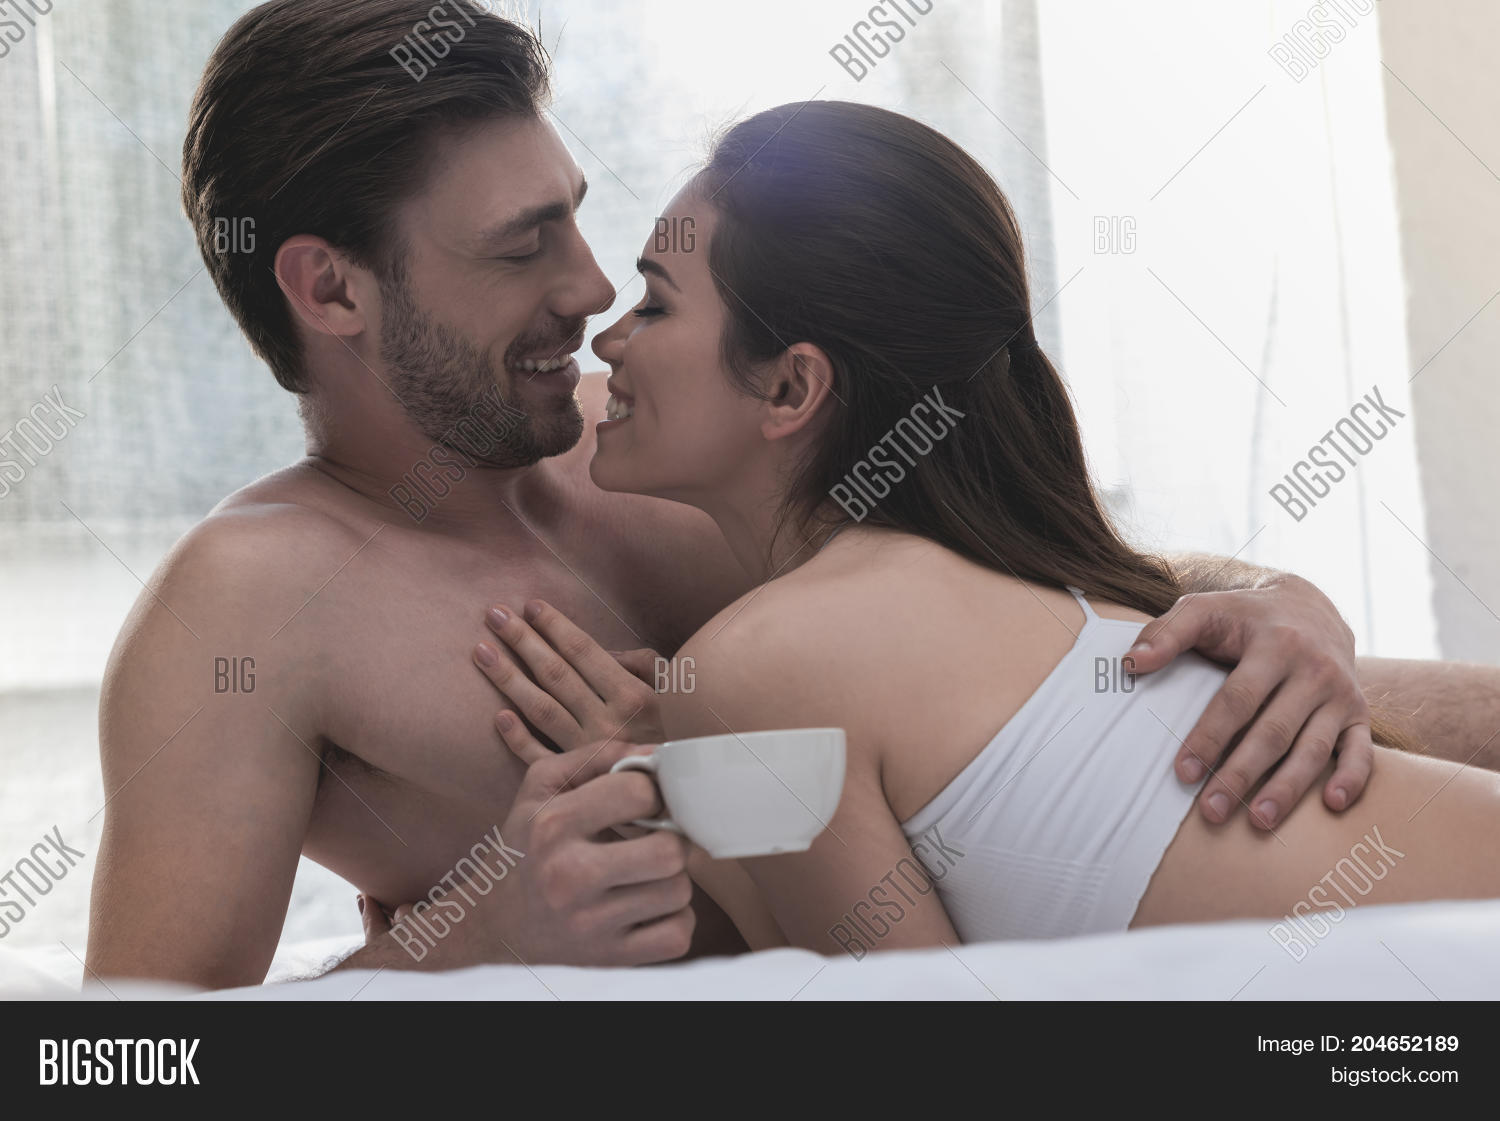 amanda c hall recommends pictures of couples cuddling in bed pic